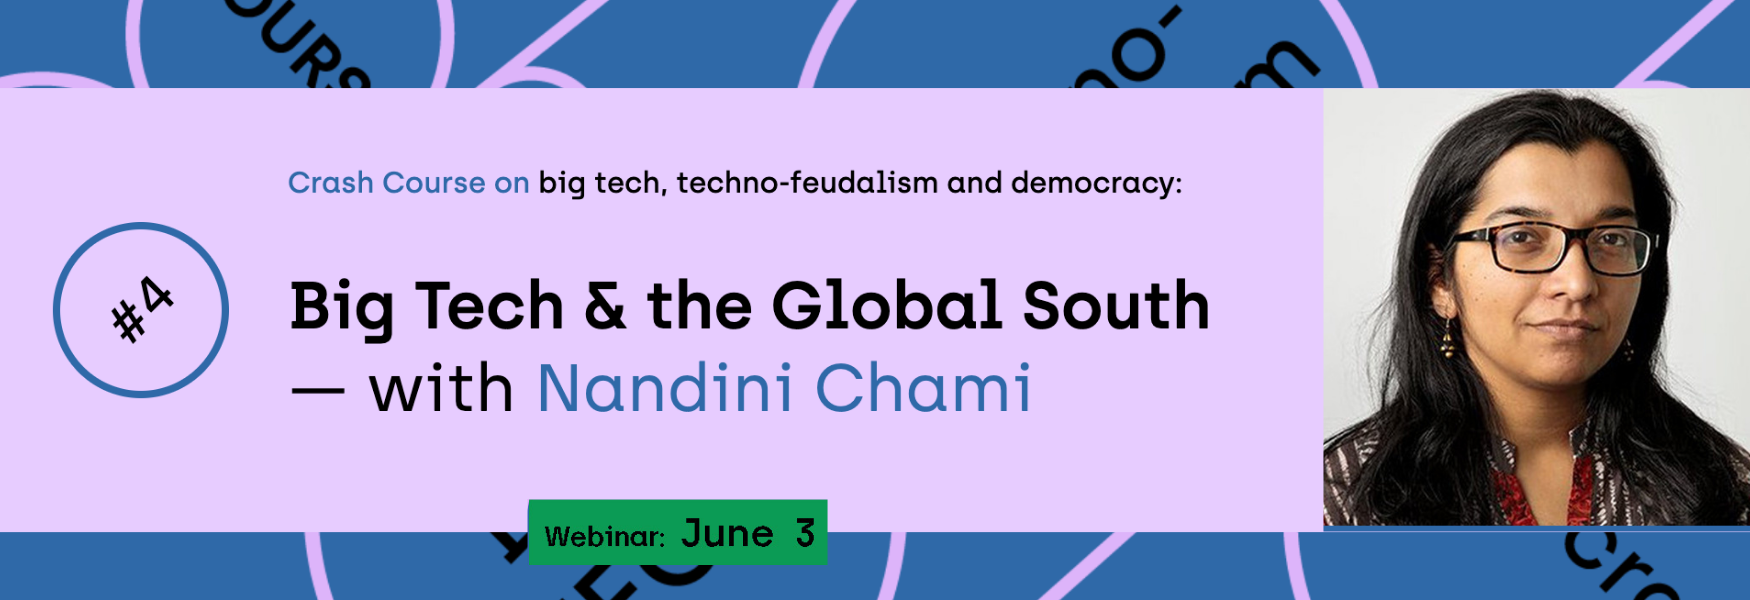 Crash Course on Big Tech and the Global South with Nandini Chami